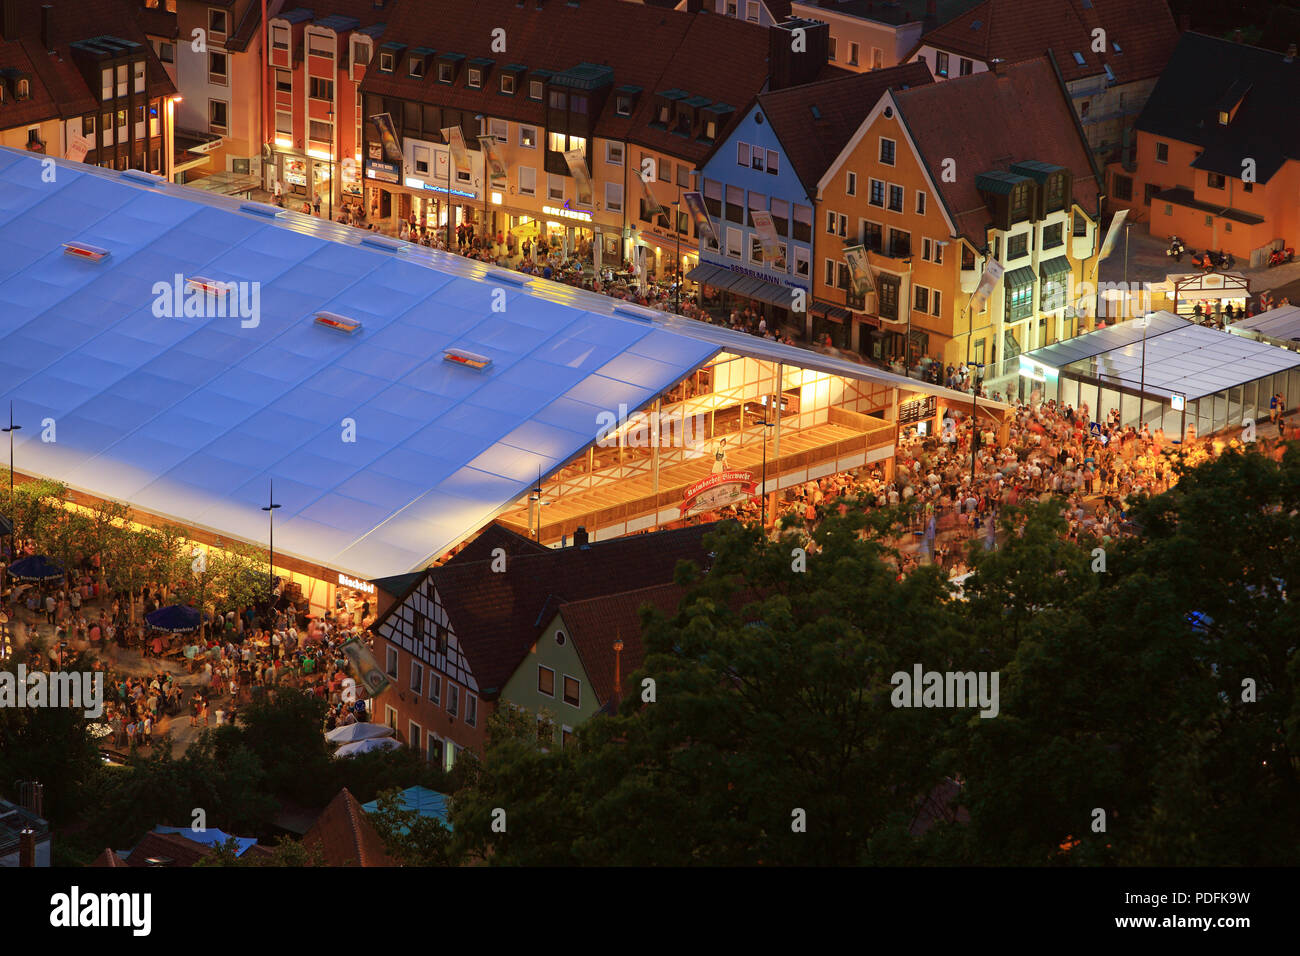 annual Beer Festival with the new festival tent from 2018, Kulmbach, Upper Franconia, Bavaria, Germany Stock Photo